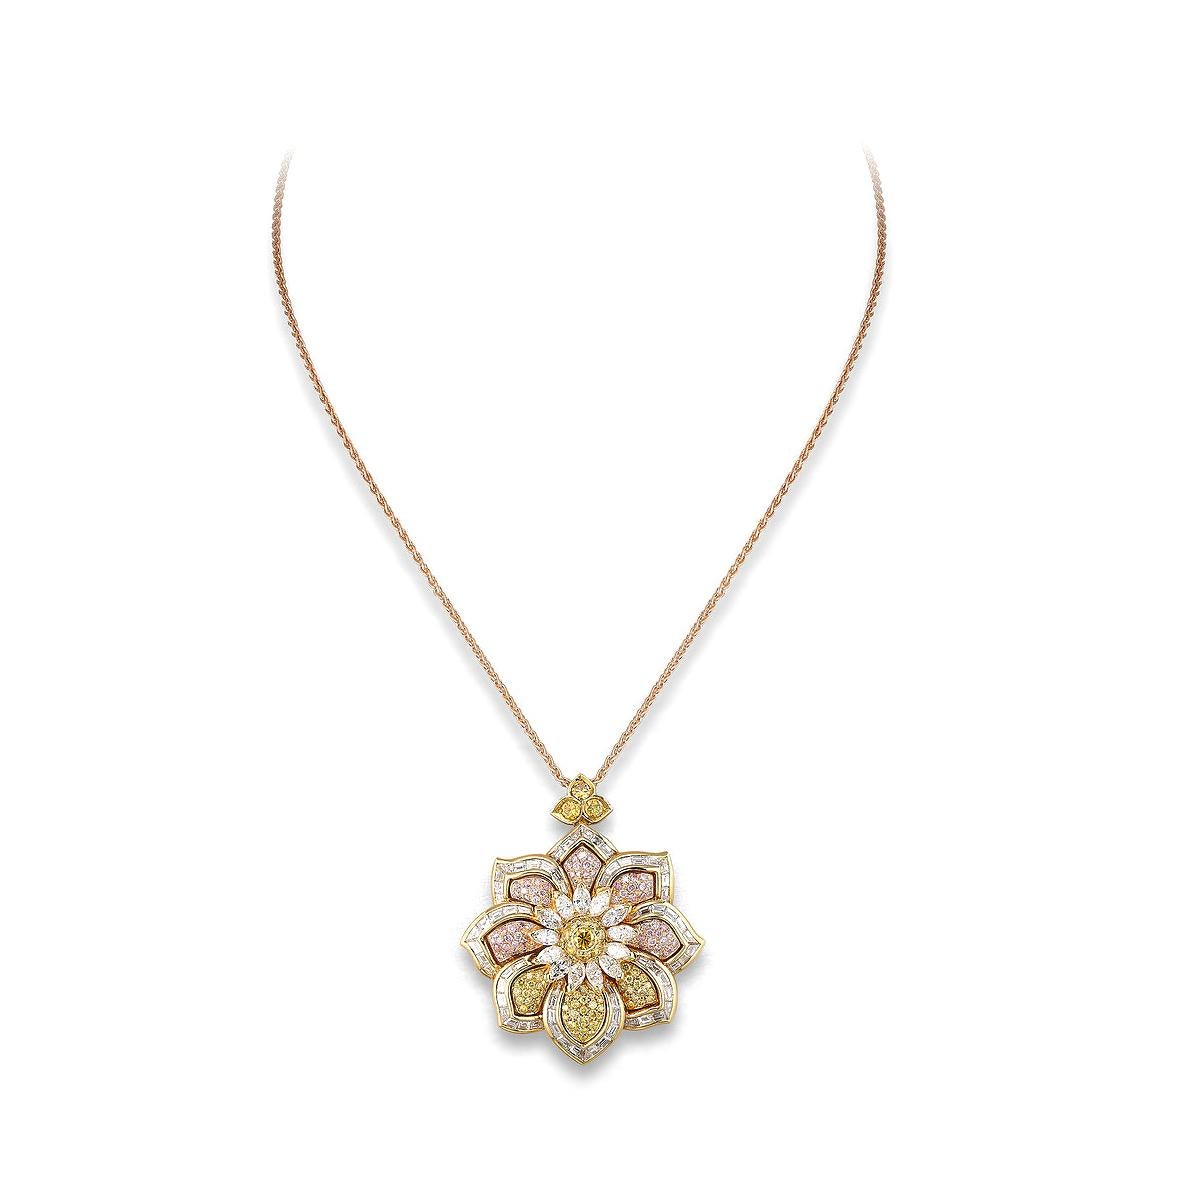 Pendant in 18kt yellow gold set with marquise and tapers cut diamonds 9.28 cts, Fancy Vivid yellow diamonds 2.04 cts and Fancy Intense pink diamonds 0.83 cts   